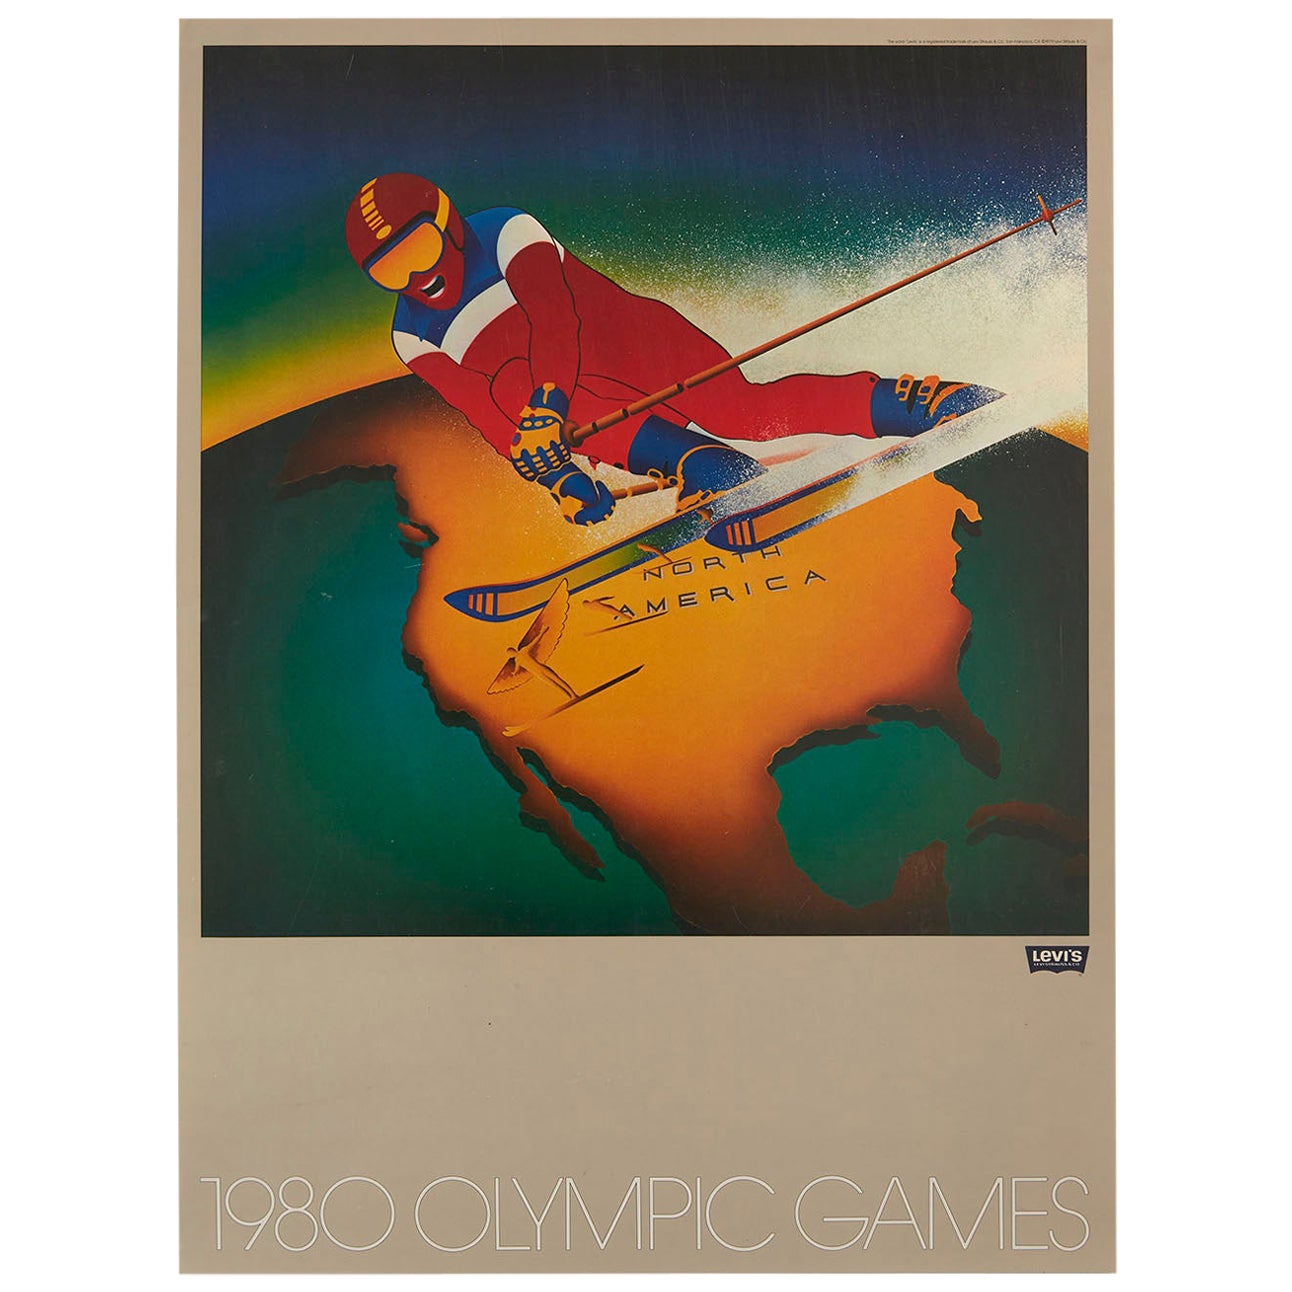 Original Vintage Sport Poster Levi's Moscow 1980 Olympic Games N. America Skiing